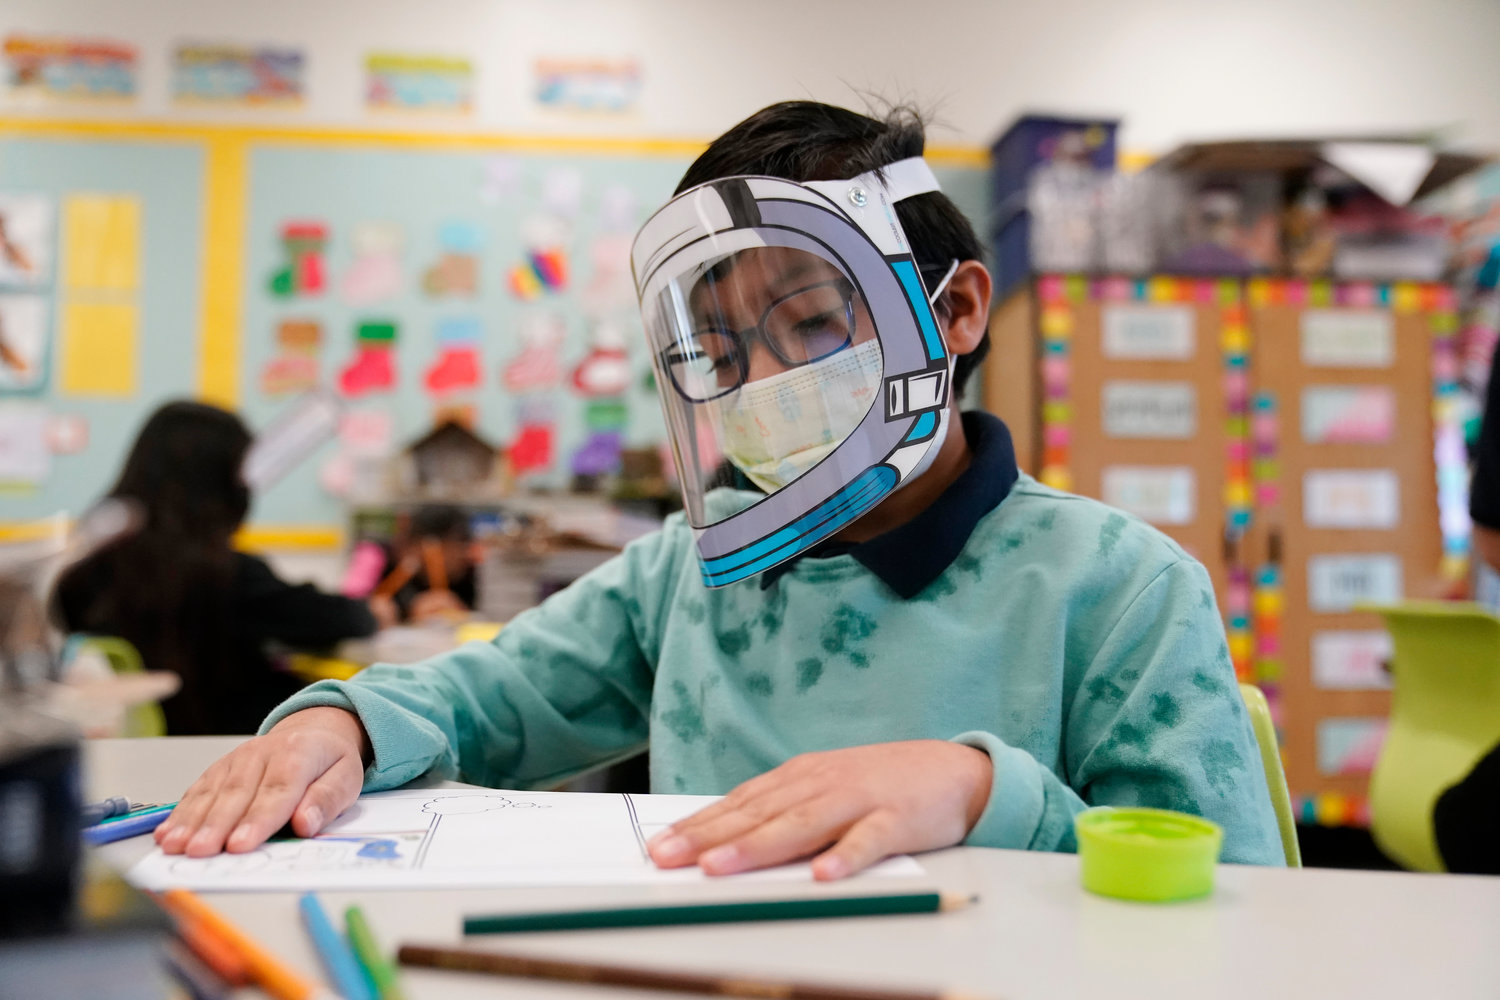 A student wears a mask and face shield in a 4th grade class amid the COVID-19 pandemic at Washington Elementary School on Jan. 12, 2022, in Lynwood, Calif. As a new school year approaches, COVID-19 infections are again on the rise, fueled by highly transmissible variants, filling families with dread. They fear the return of a pandemic scourge: outbreaks that sideline large numbers of teachers, close school buildings and force students back into remote learning.